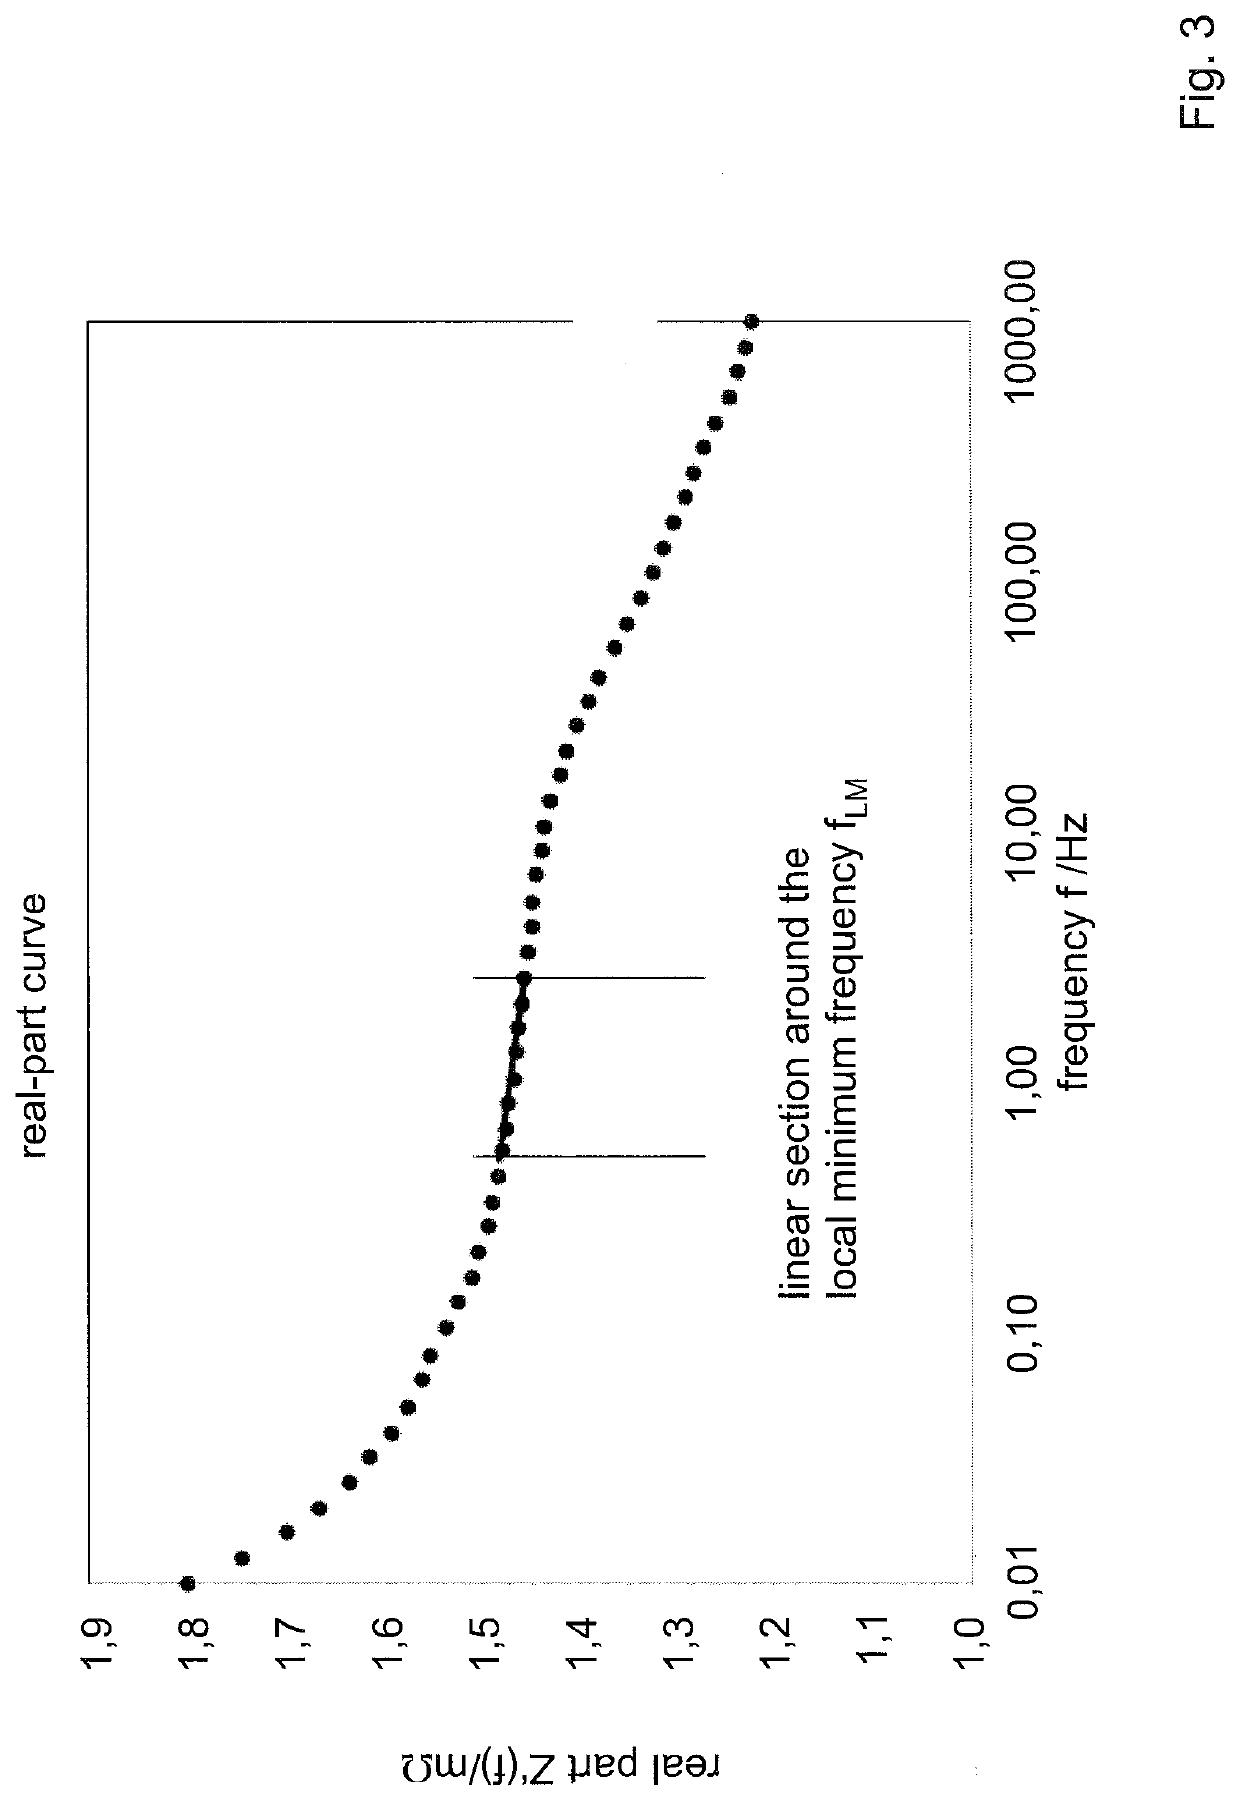 Method for determining an ageing parameter, a state of charge parameter and a temperature of a rechargeable battery, especially a lithium rechargeable battery